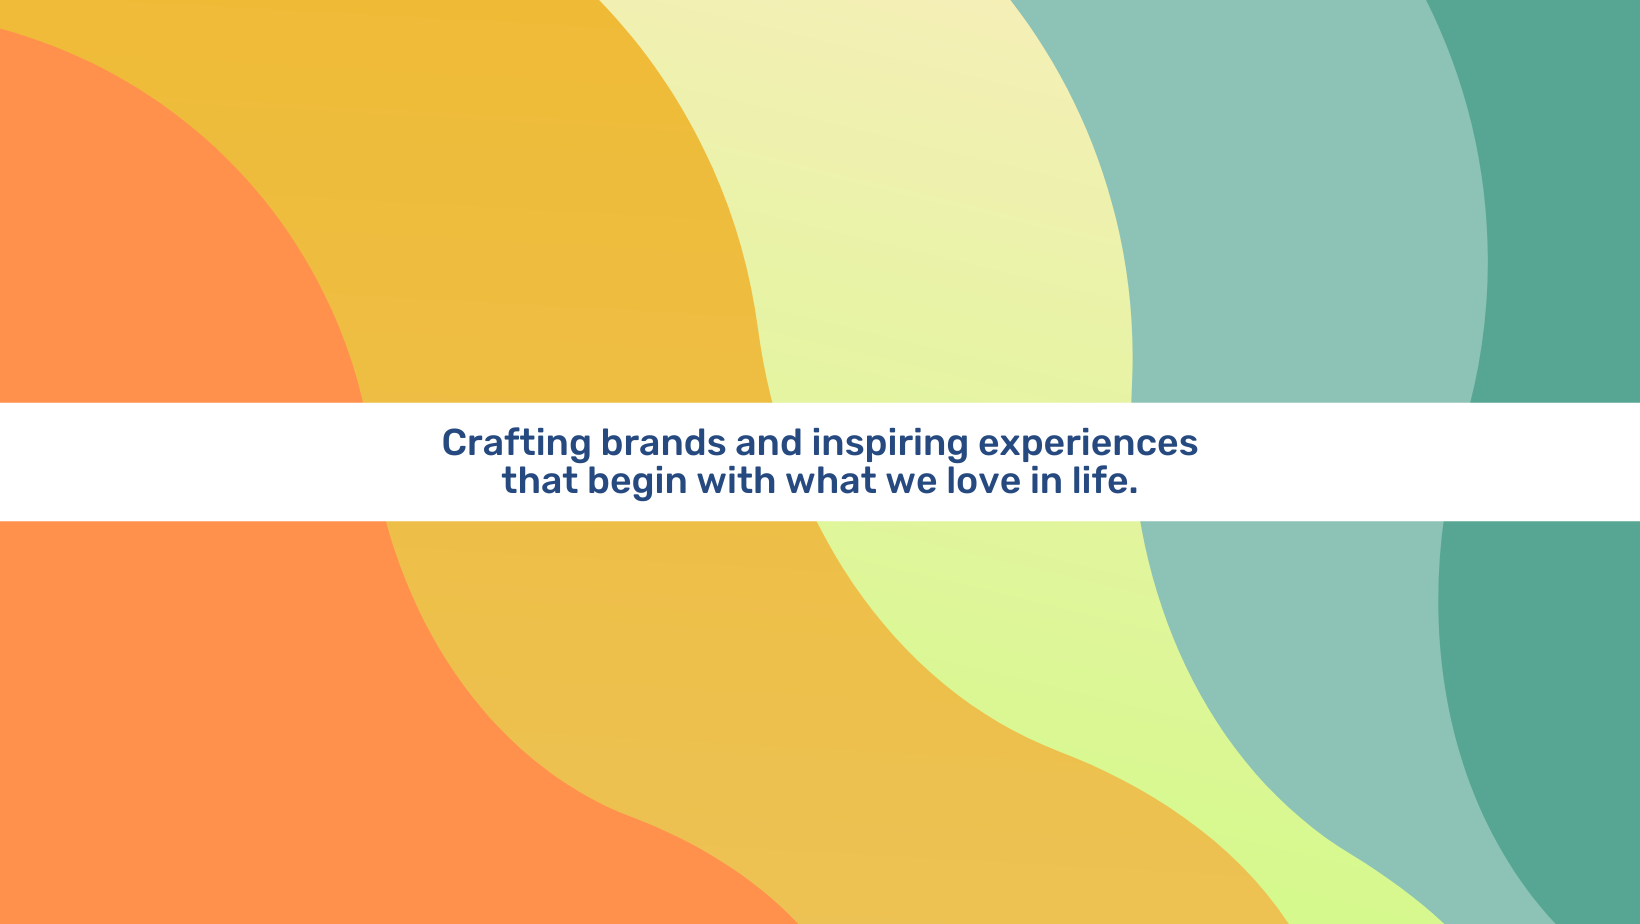 For The Love Of crafts brands and inspires experiences that begin with what we love in life.